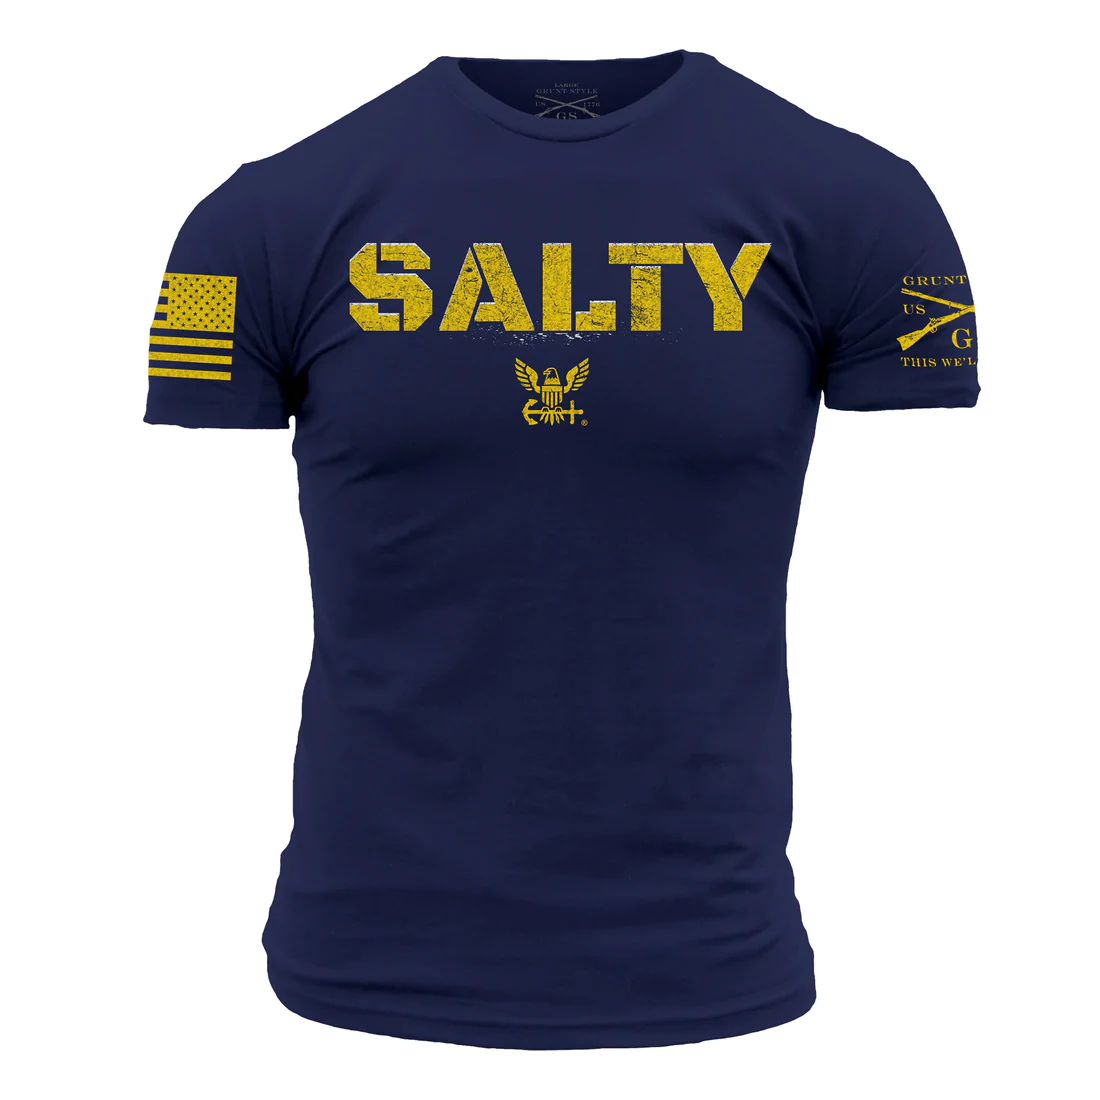 Grunt Style Men's United States Navy Salty Tee posted by ProdOrigin USA in Men's Apparel